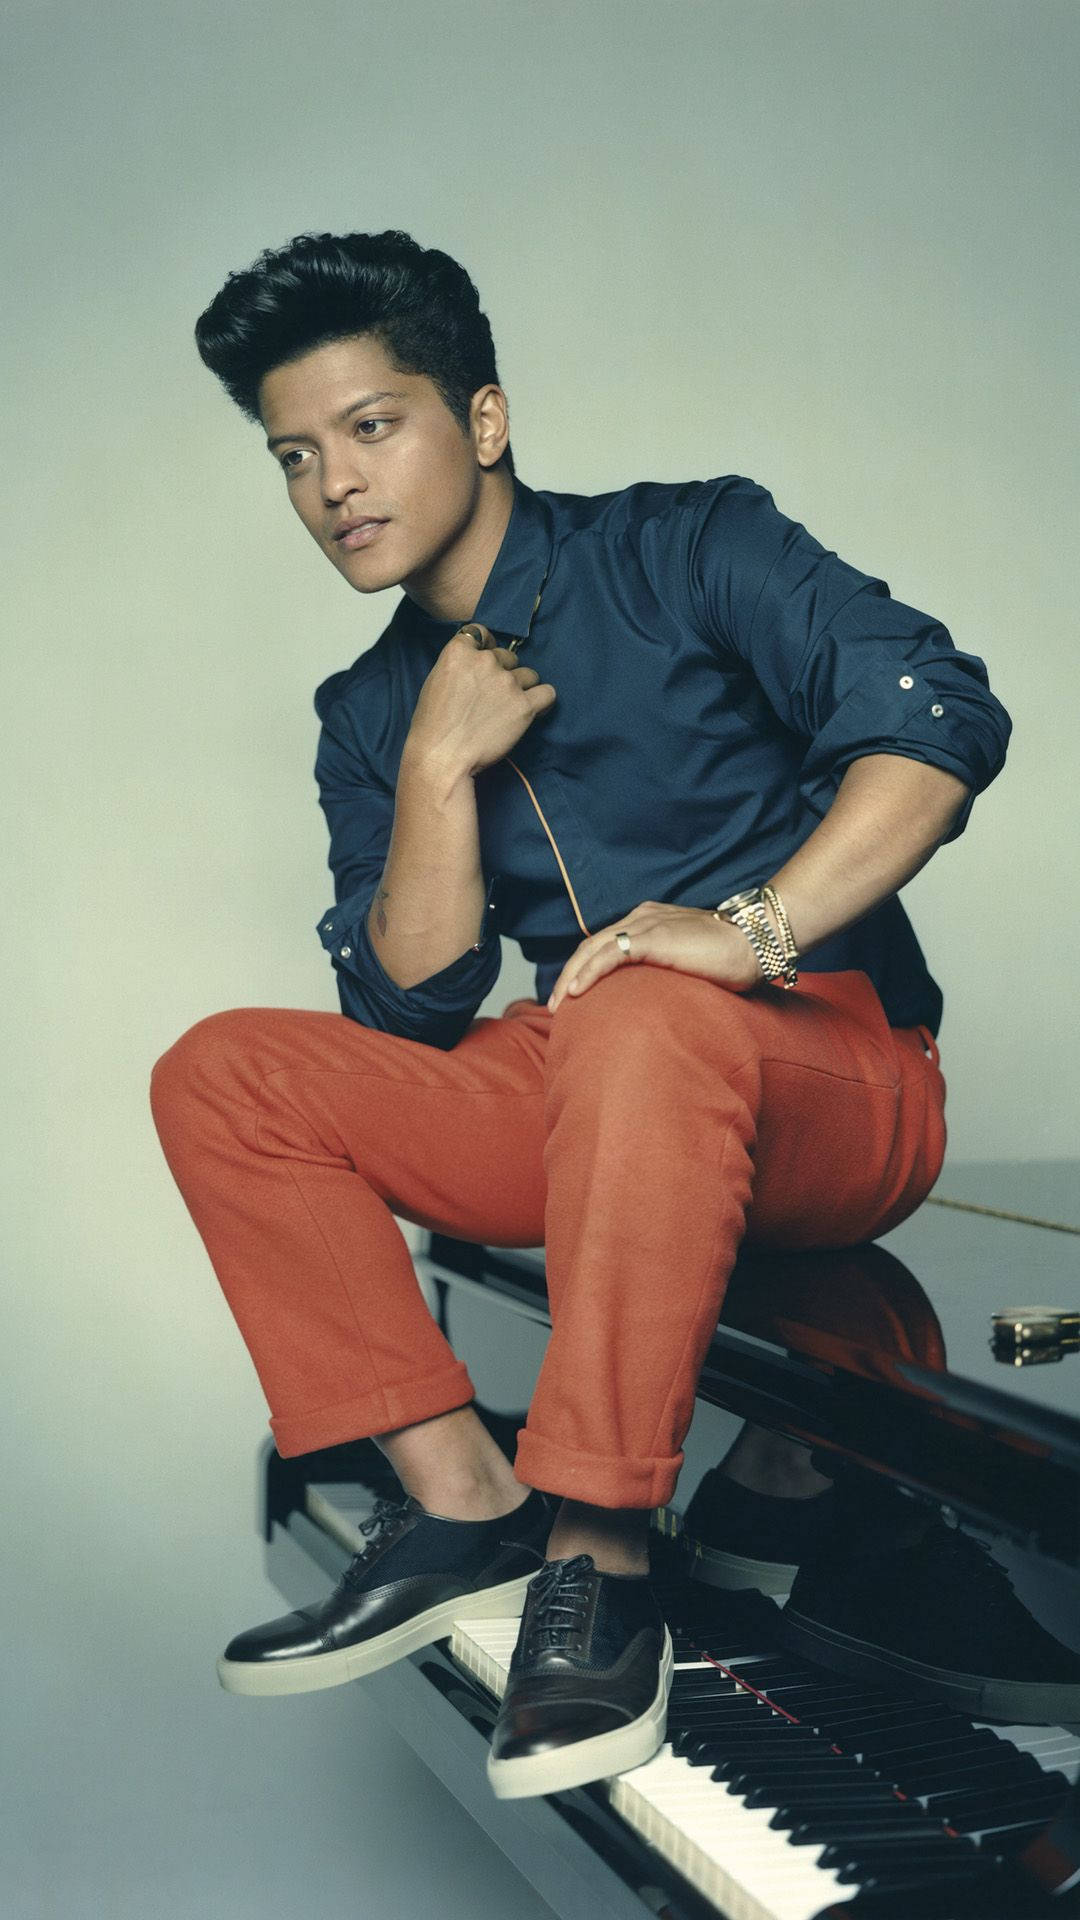 Singer Bruno Mars Showing Off His Piano Skills Background